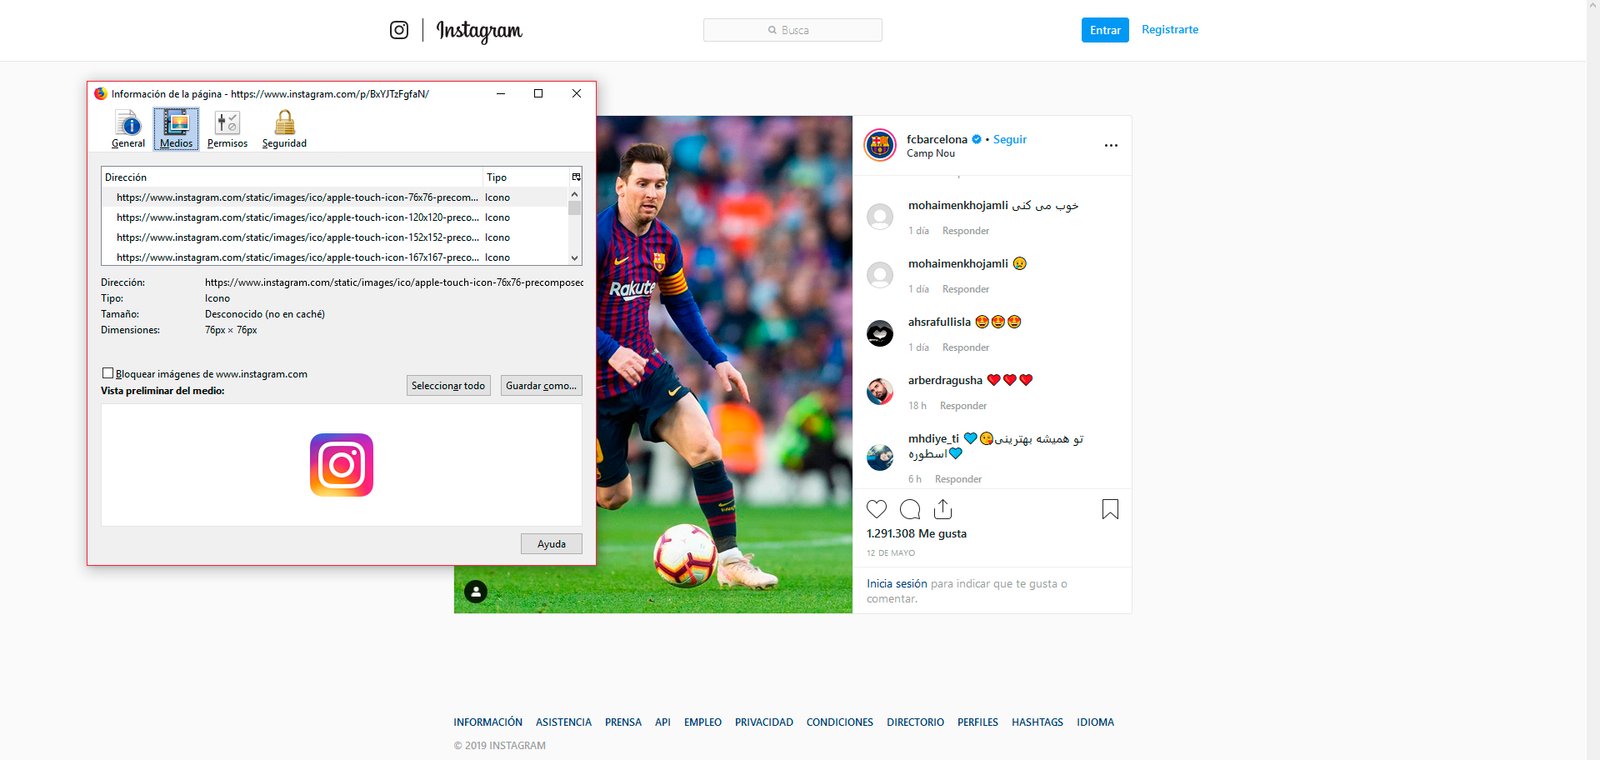 Instagram: How to Download Images on Windows PC or Mac